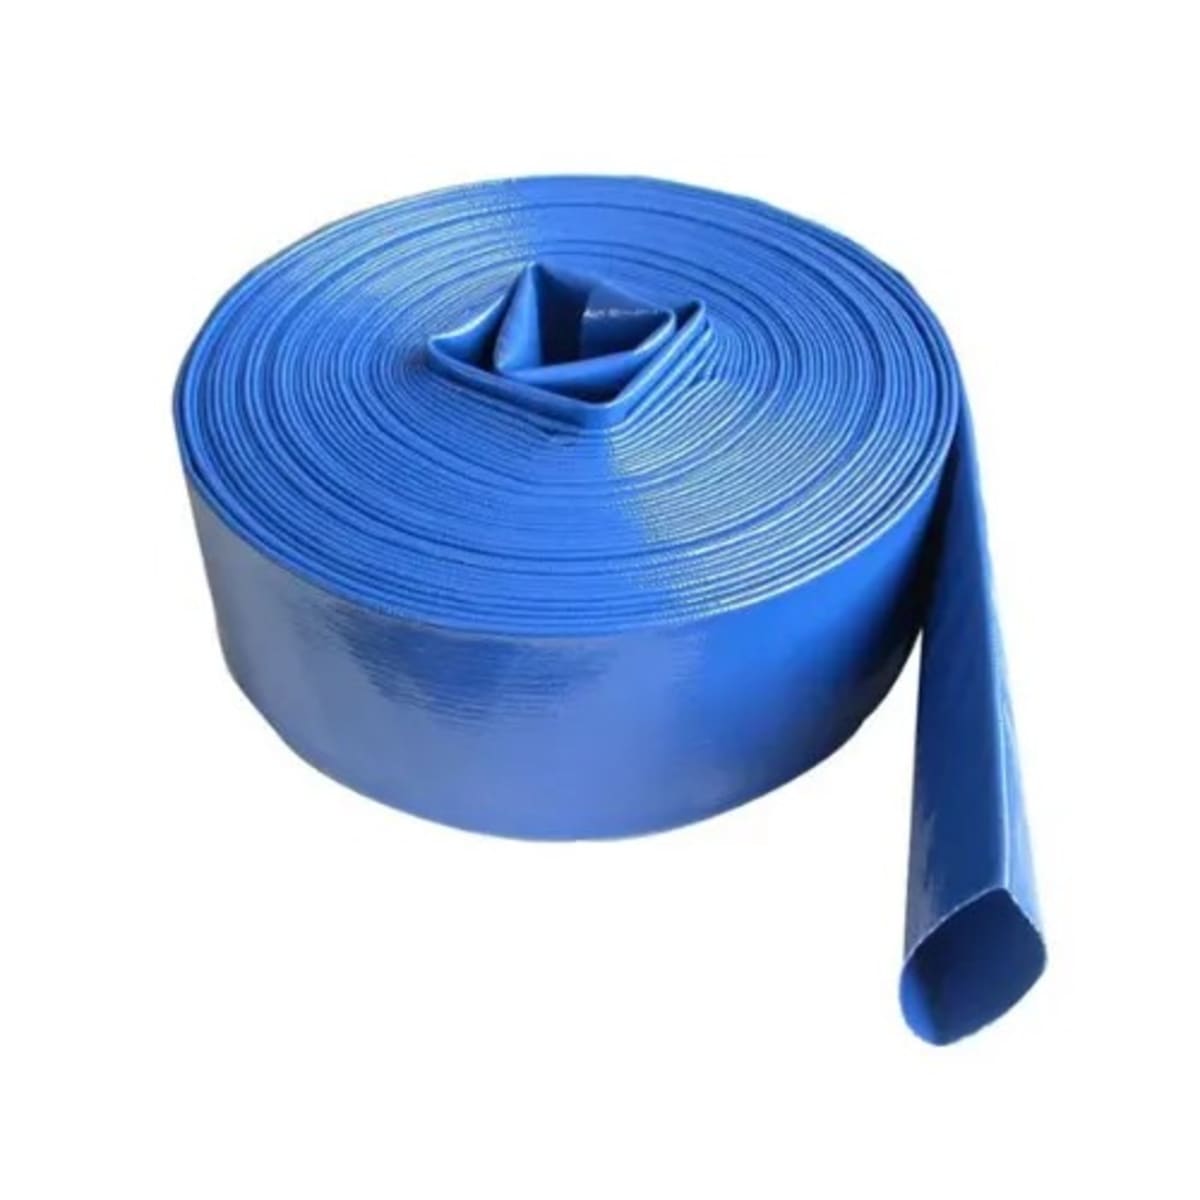 Berry 2" High Pressure Water Outlet Hose 100m MFB50100M | Supply Master Accra, Ghana Gasoline Water Pump Buy Tools hardware Building materials